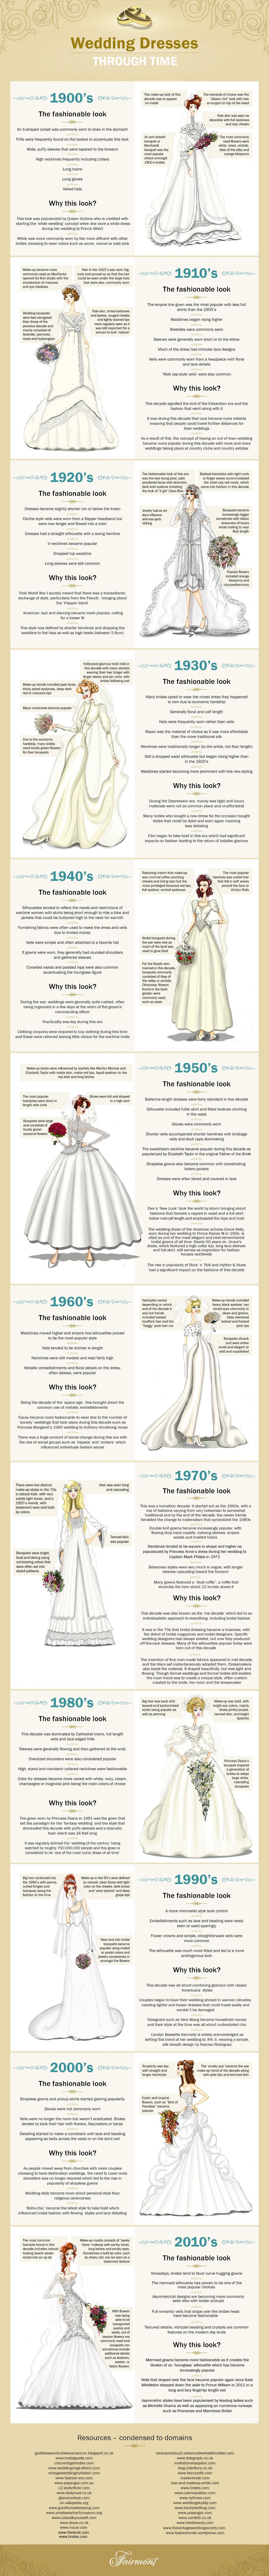 This Is How Wedding Dress Trends Have Changed Over The 